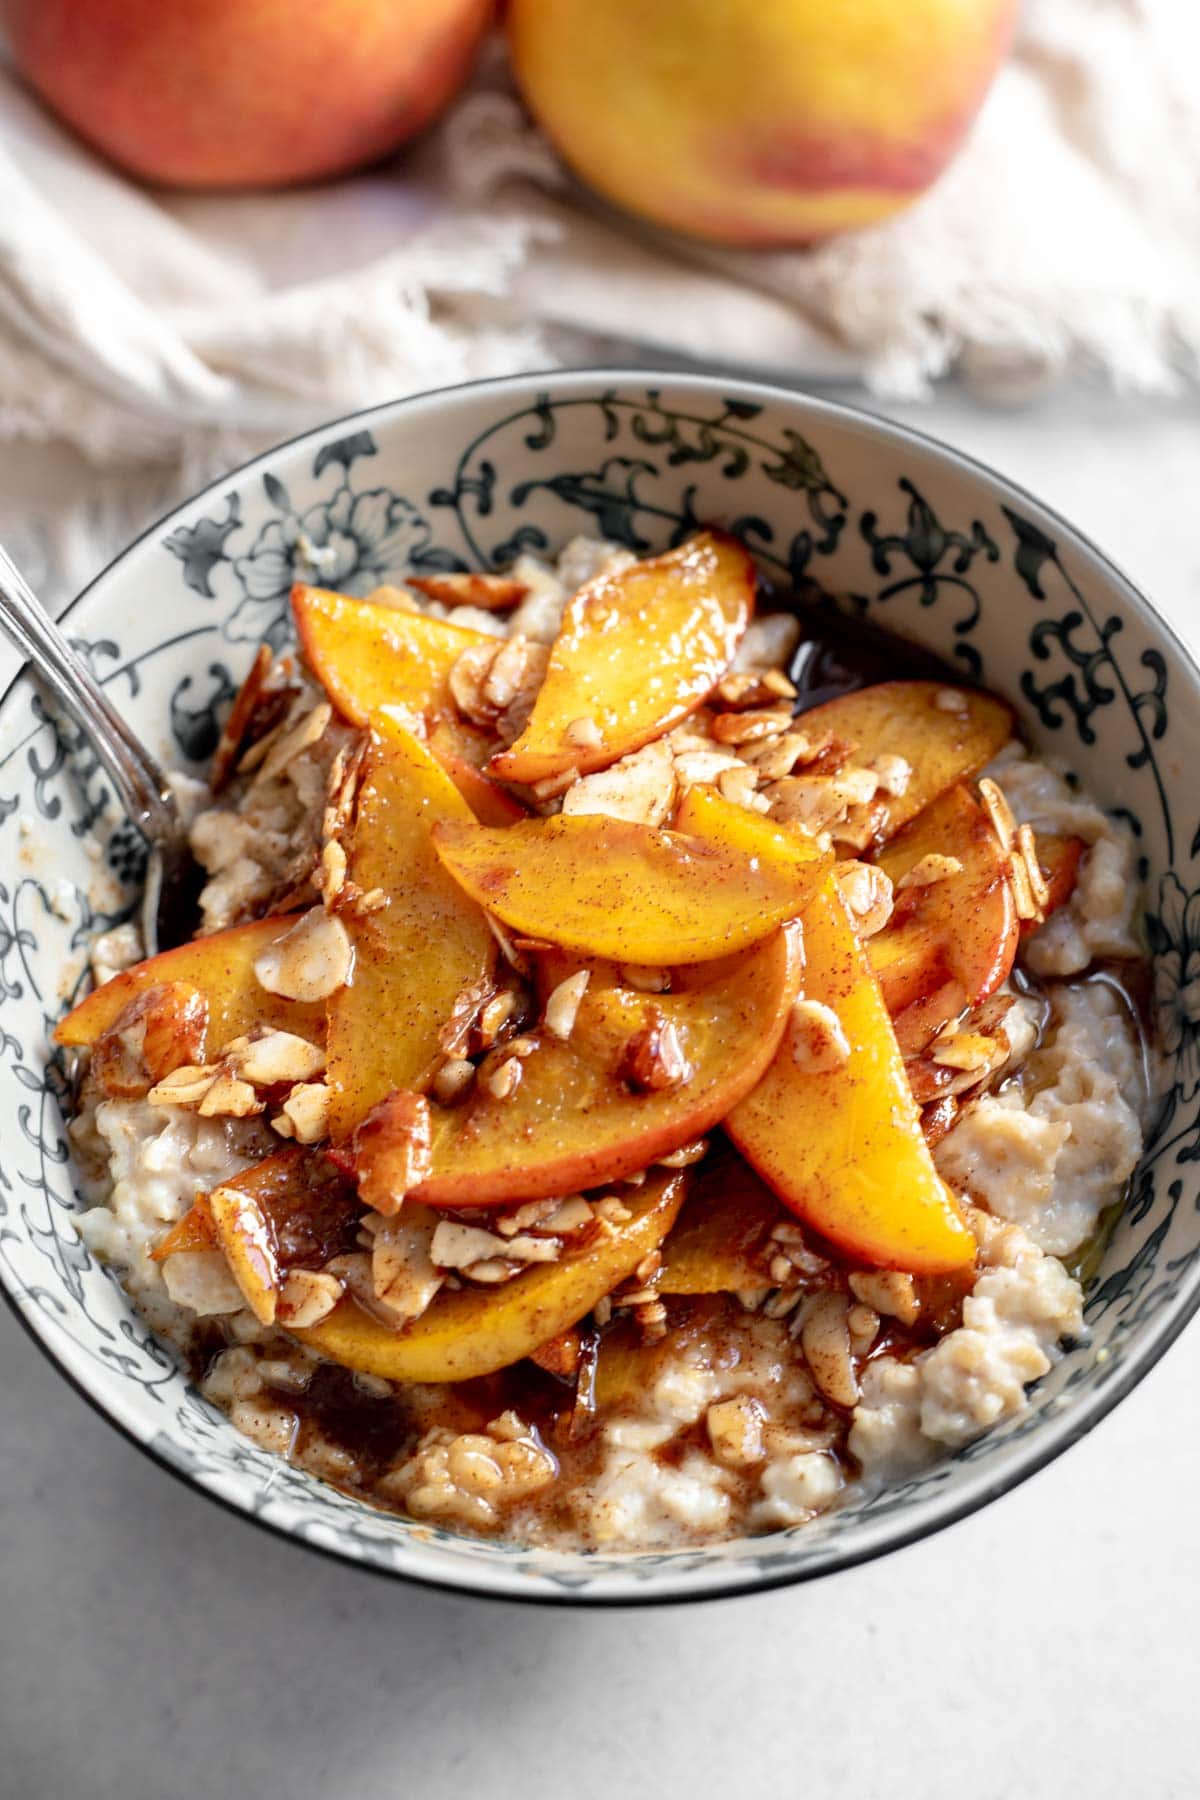 Bowl of oatmeal topped with peaches and almonds in front of two peaches